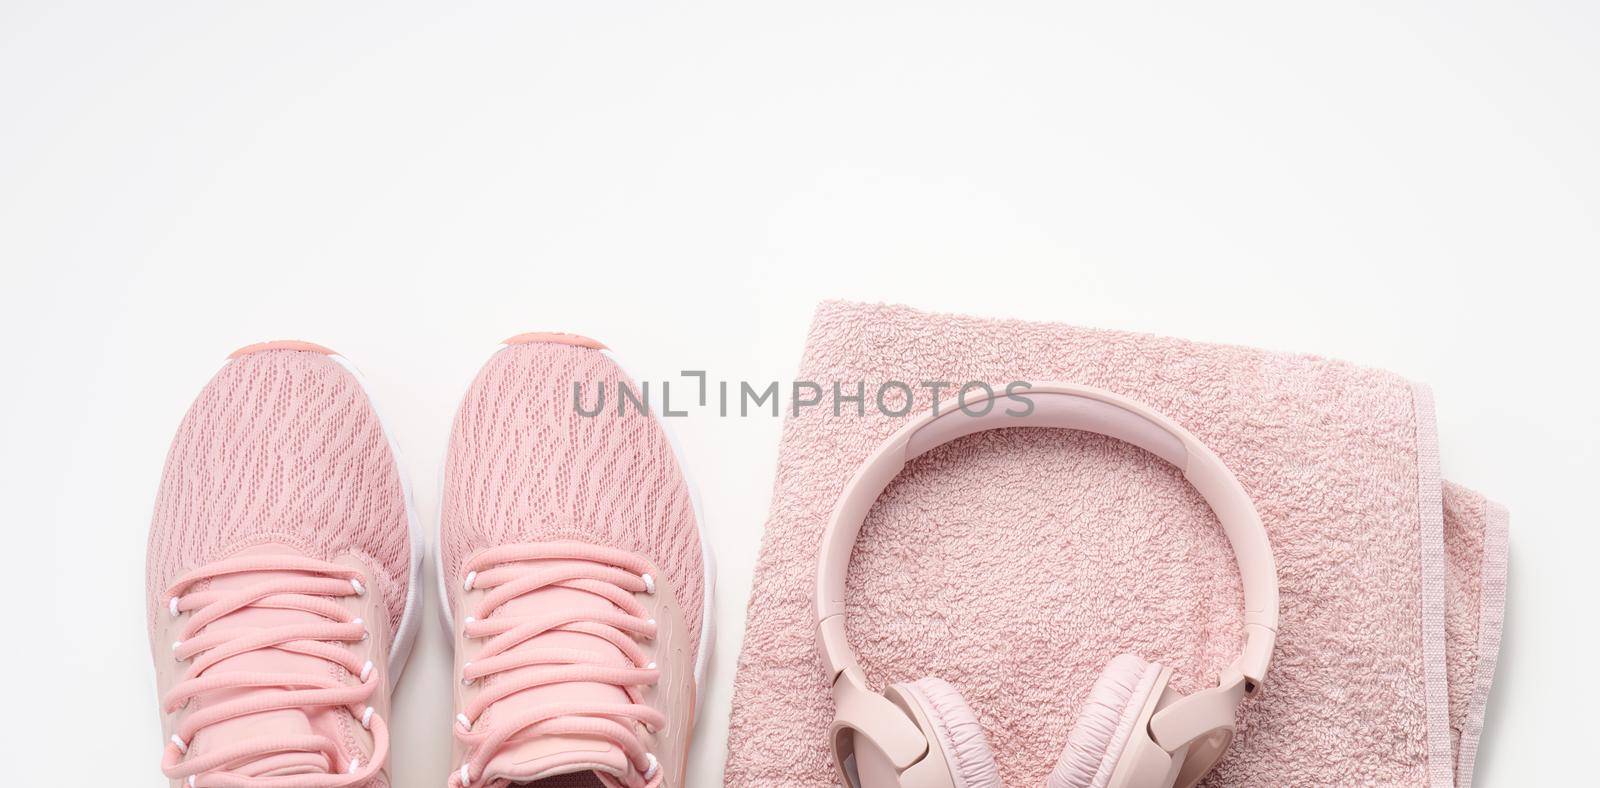 pair of pink textile sneakers, wireless headphones and a textile pink towel on a white background by ndanko